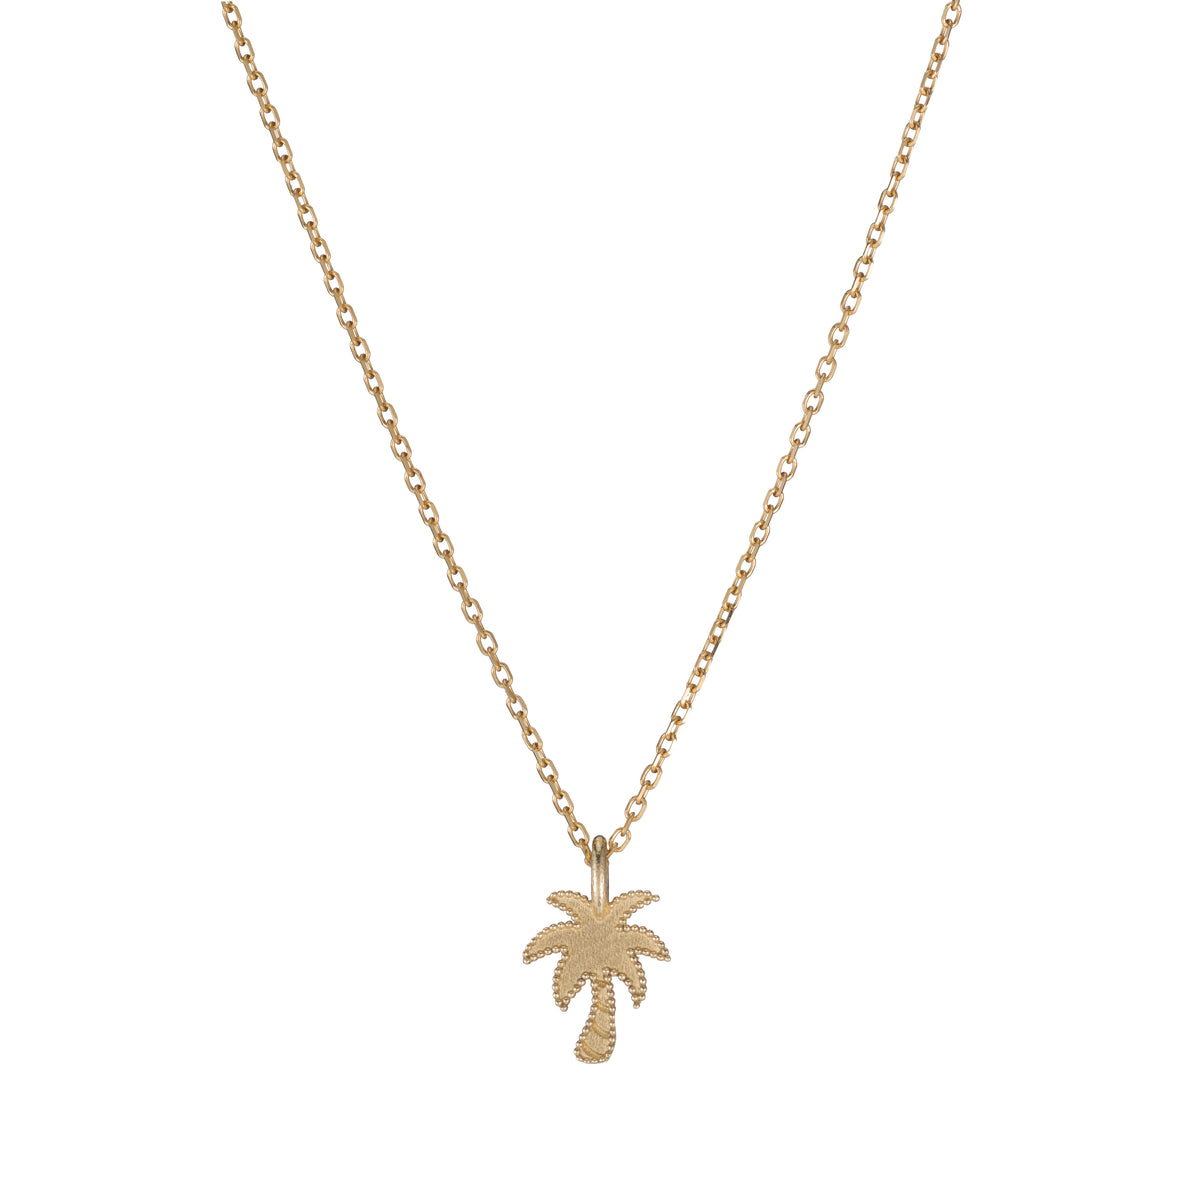 Beaded Palm Tree Necklace